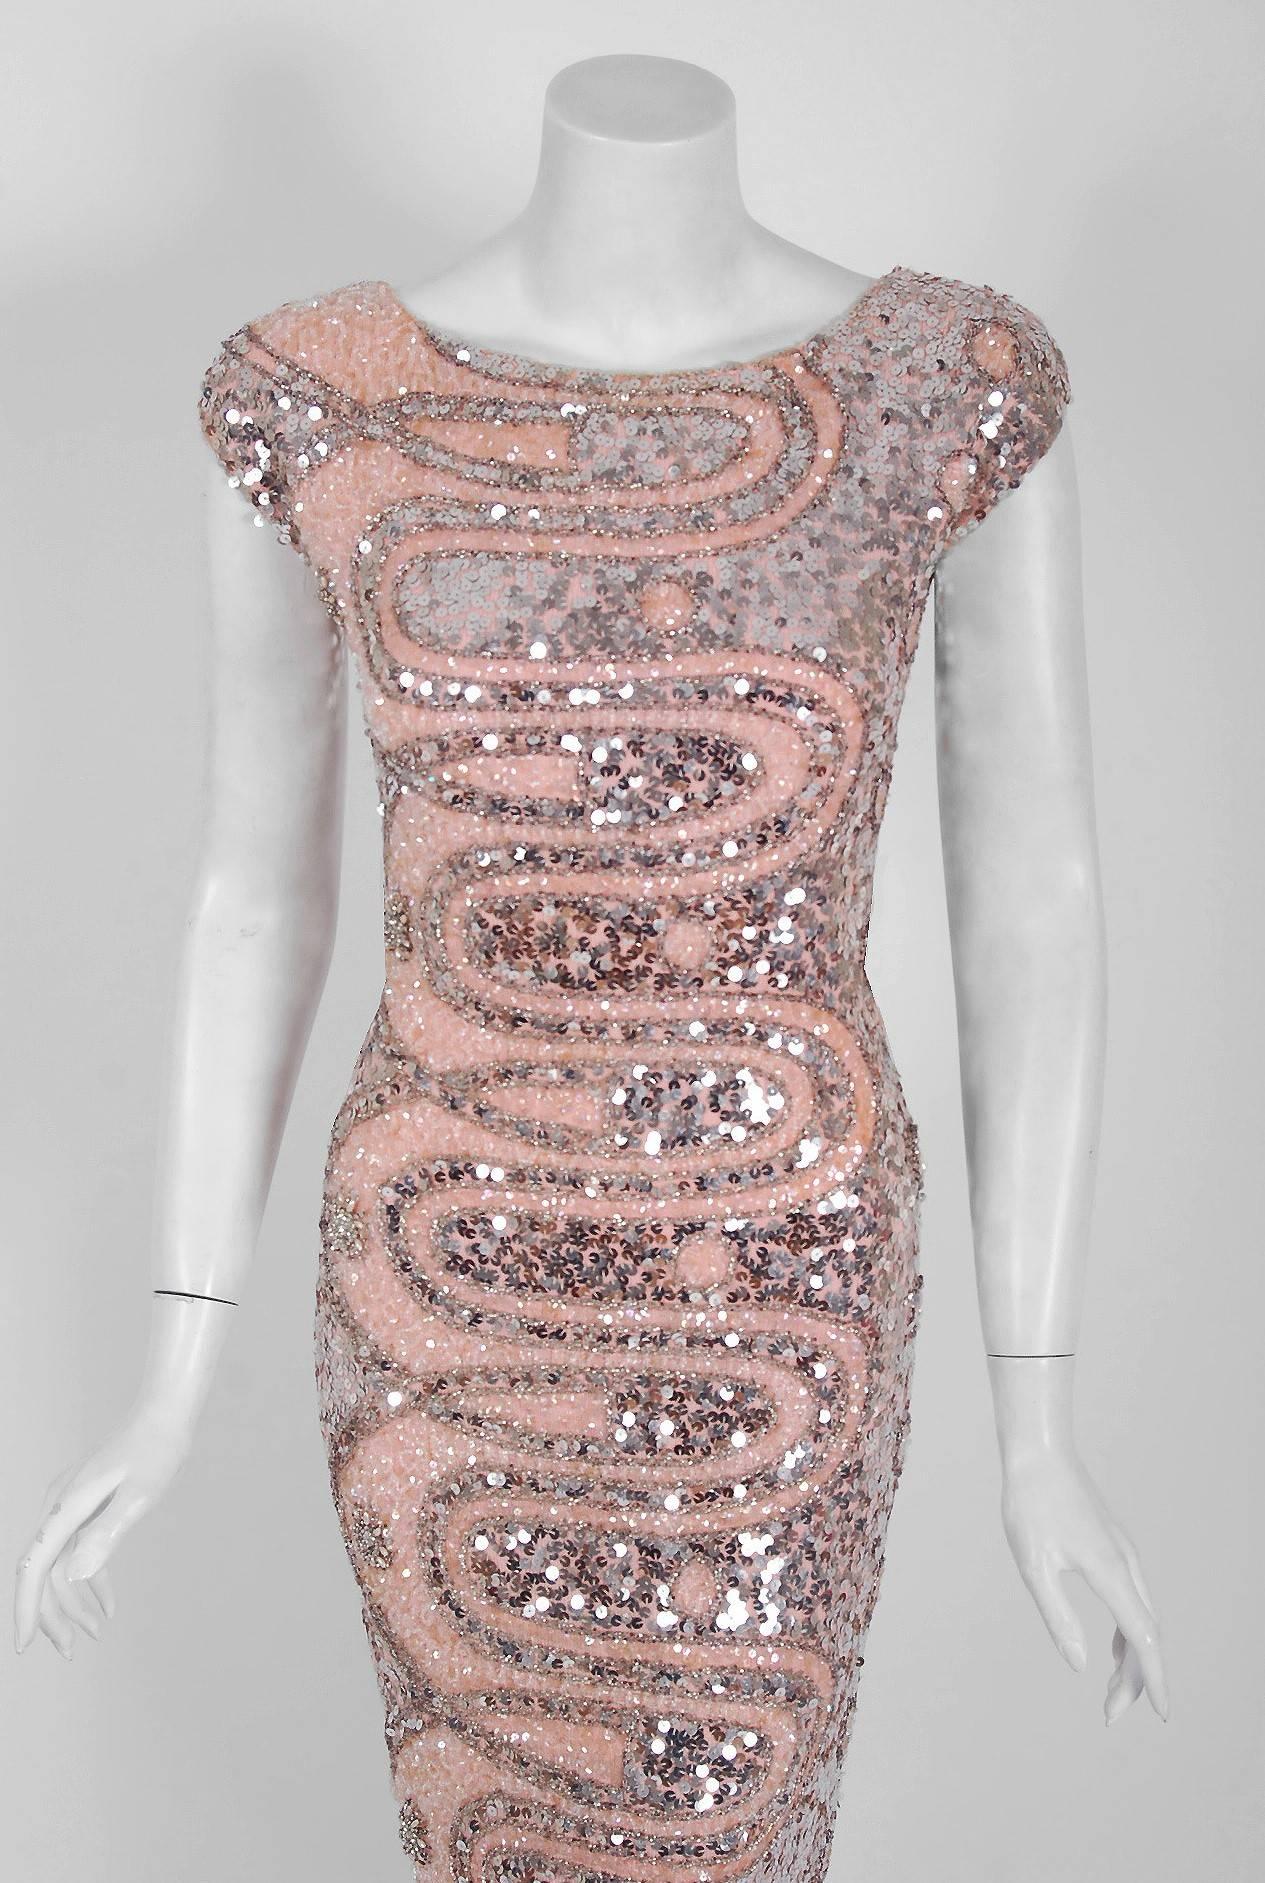 1950's Gene Shelly designer garments are in a class of their own. They are always fully-sequined by hand and fit to flatter the figure. This treasure has a fantastic abstract atomic swirl pattern, featuring silver glass-beads. The base is a soft